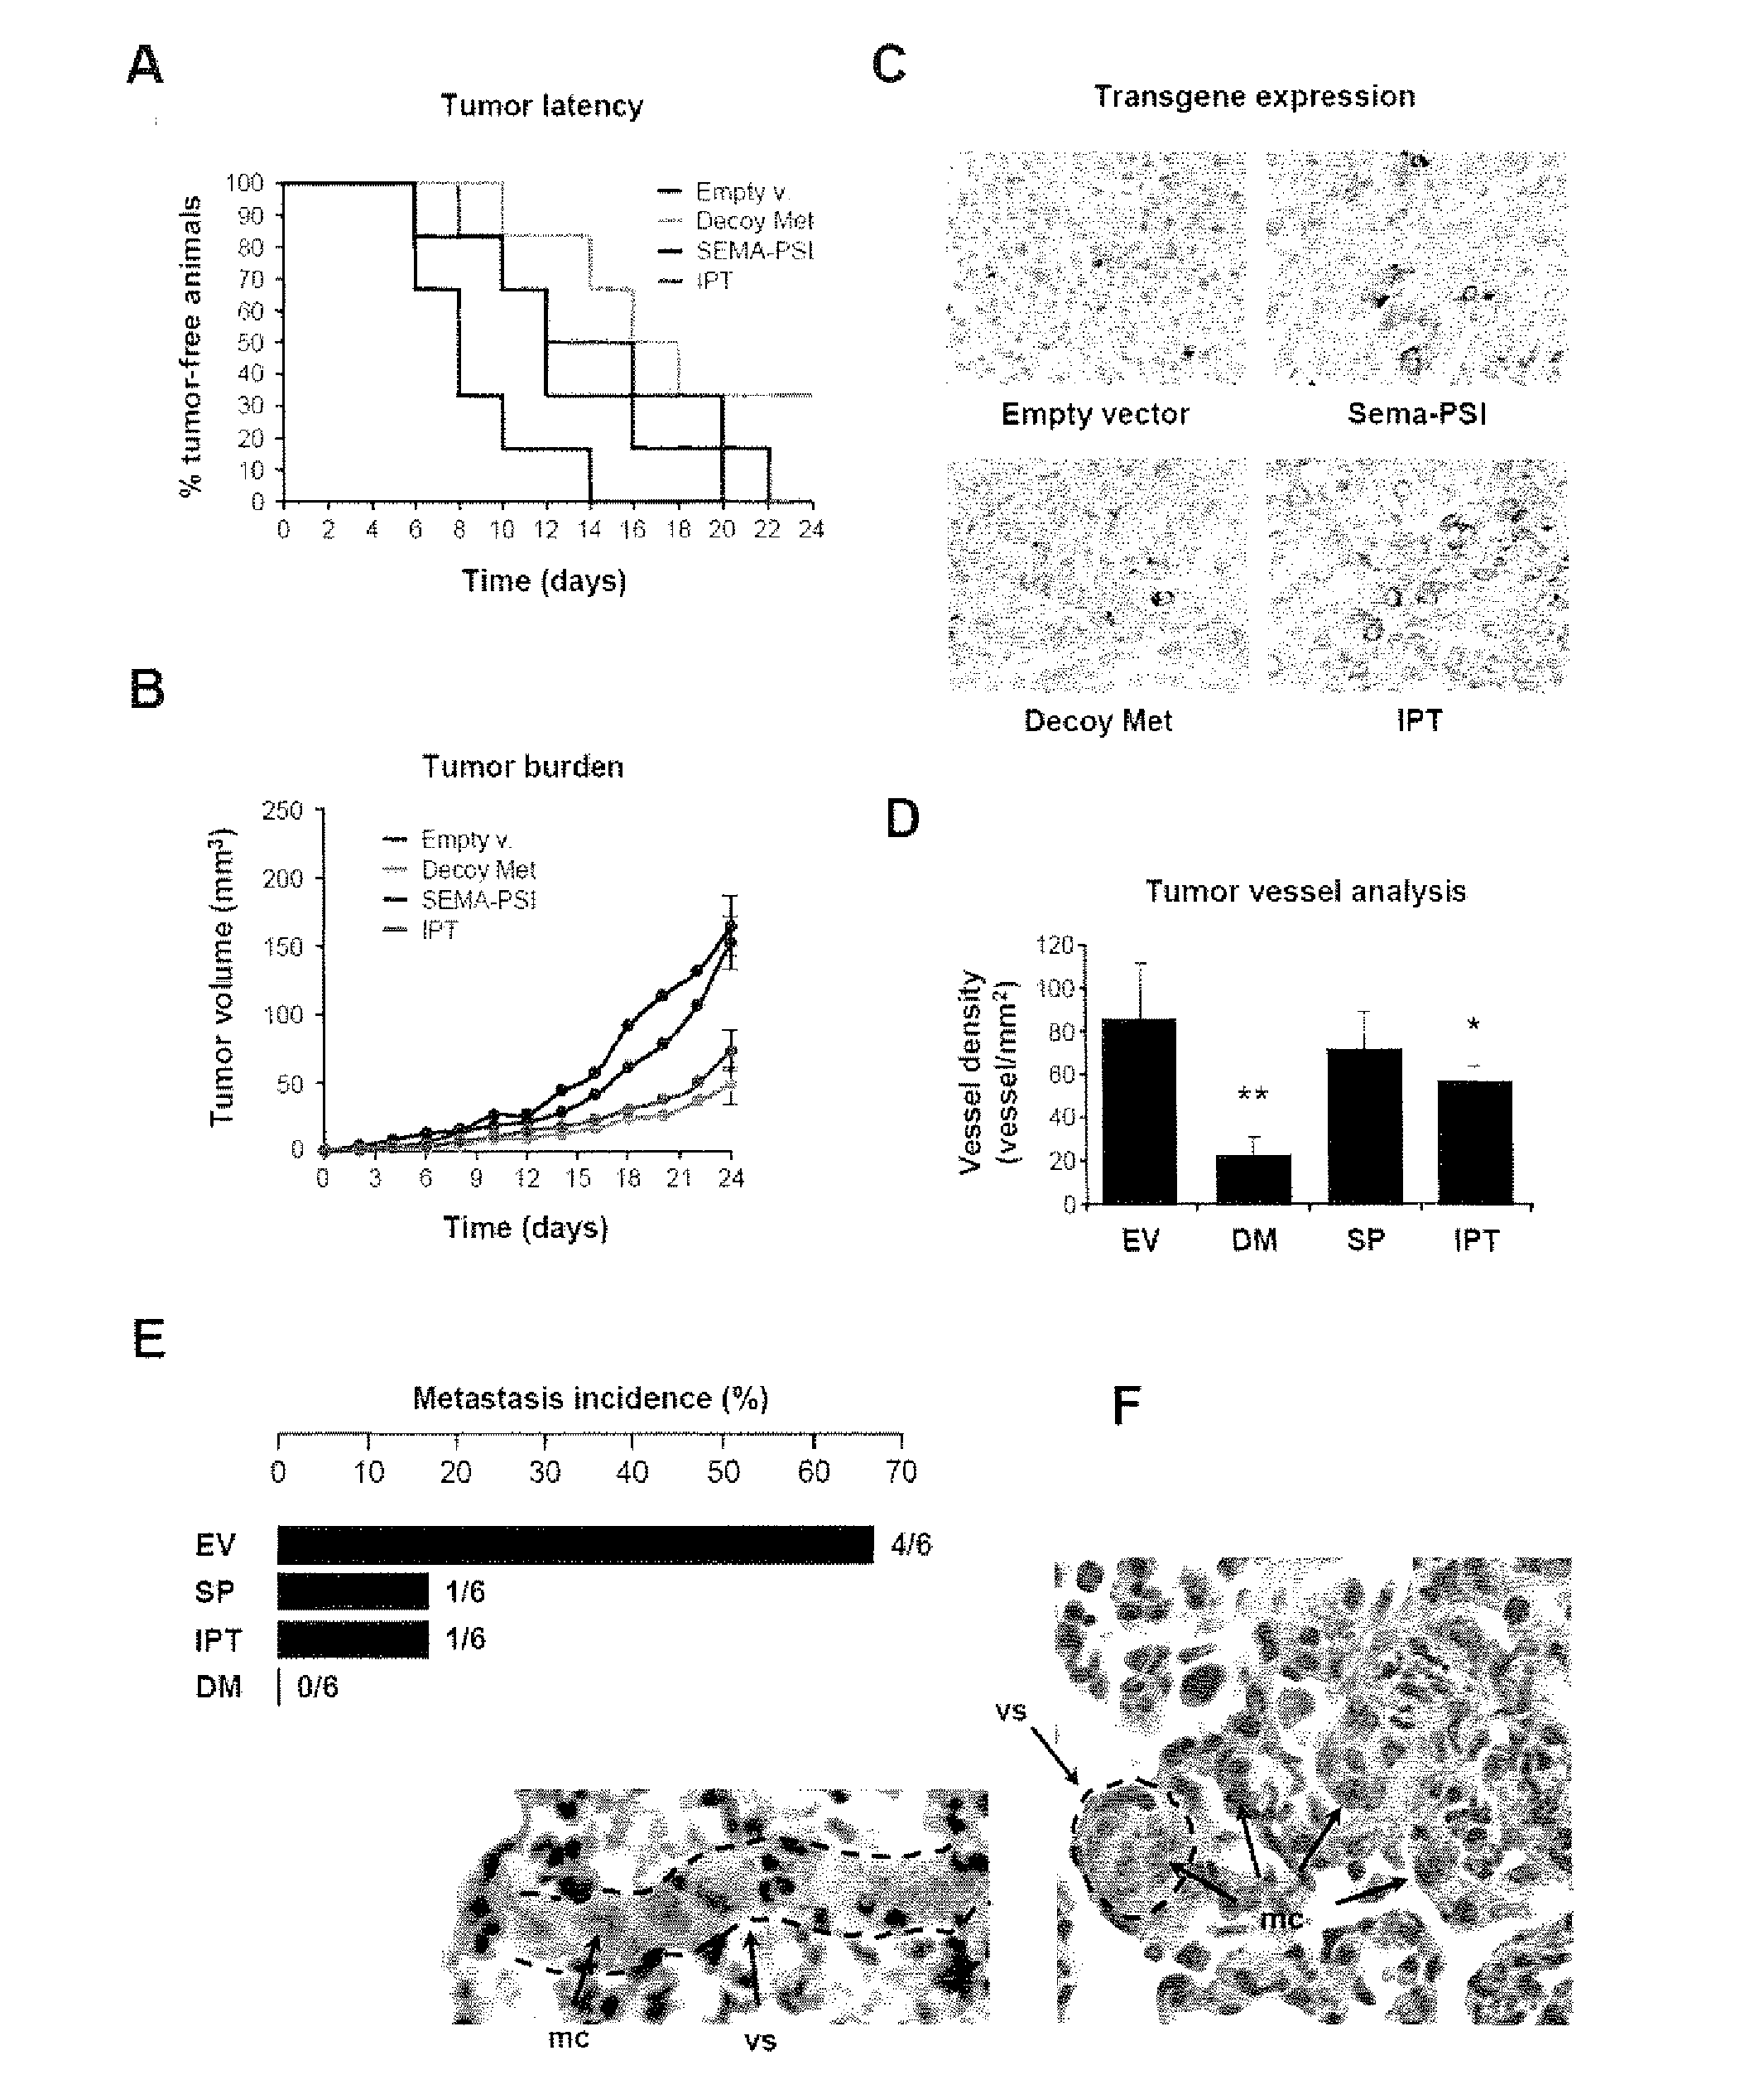 High affinity binding site of hgfr and methods for identification of antagonists thereof